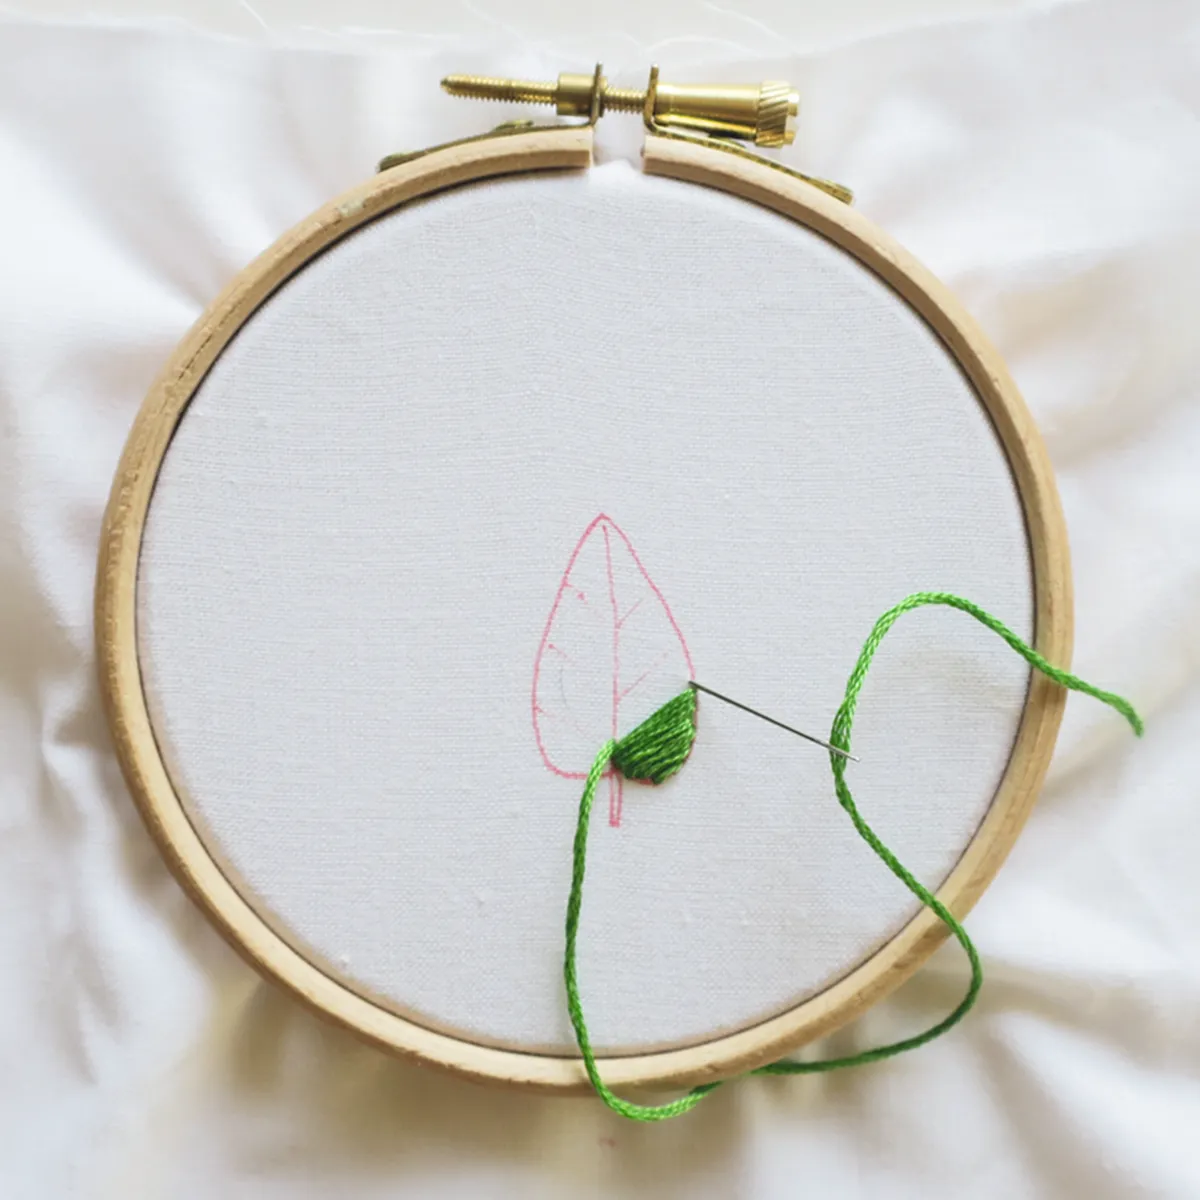 6 Tips for Learning to Sew Without Patterns - Resources for a Handmade  Lifestyle - Made by Hand